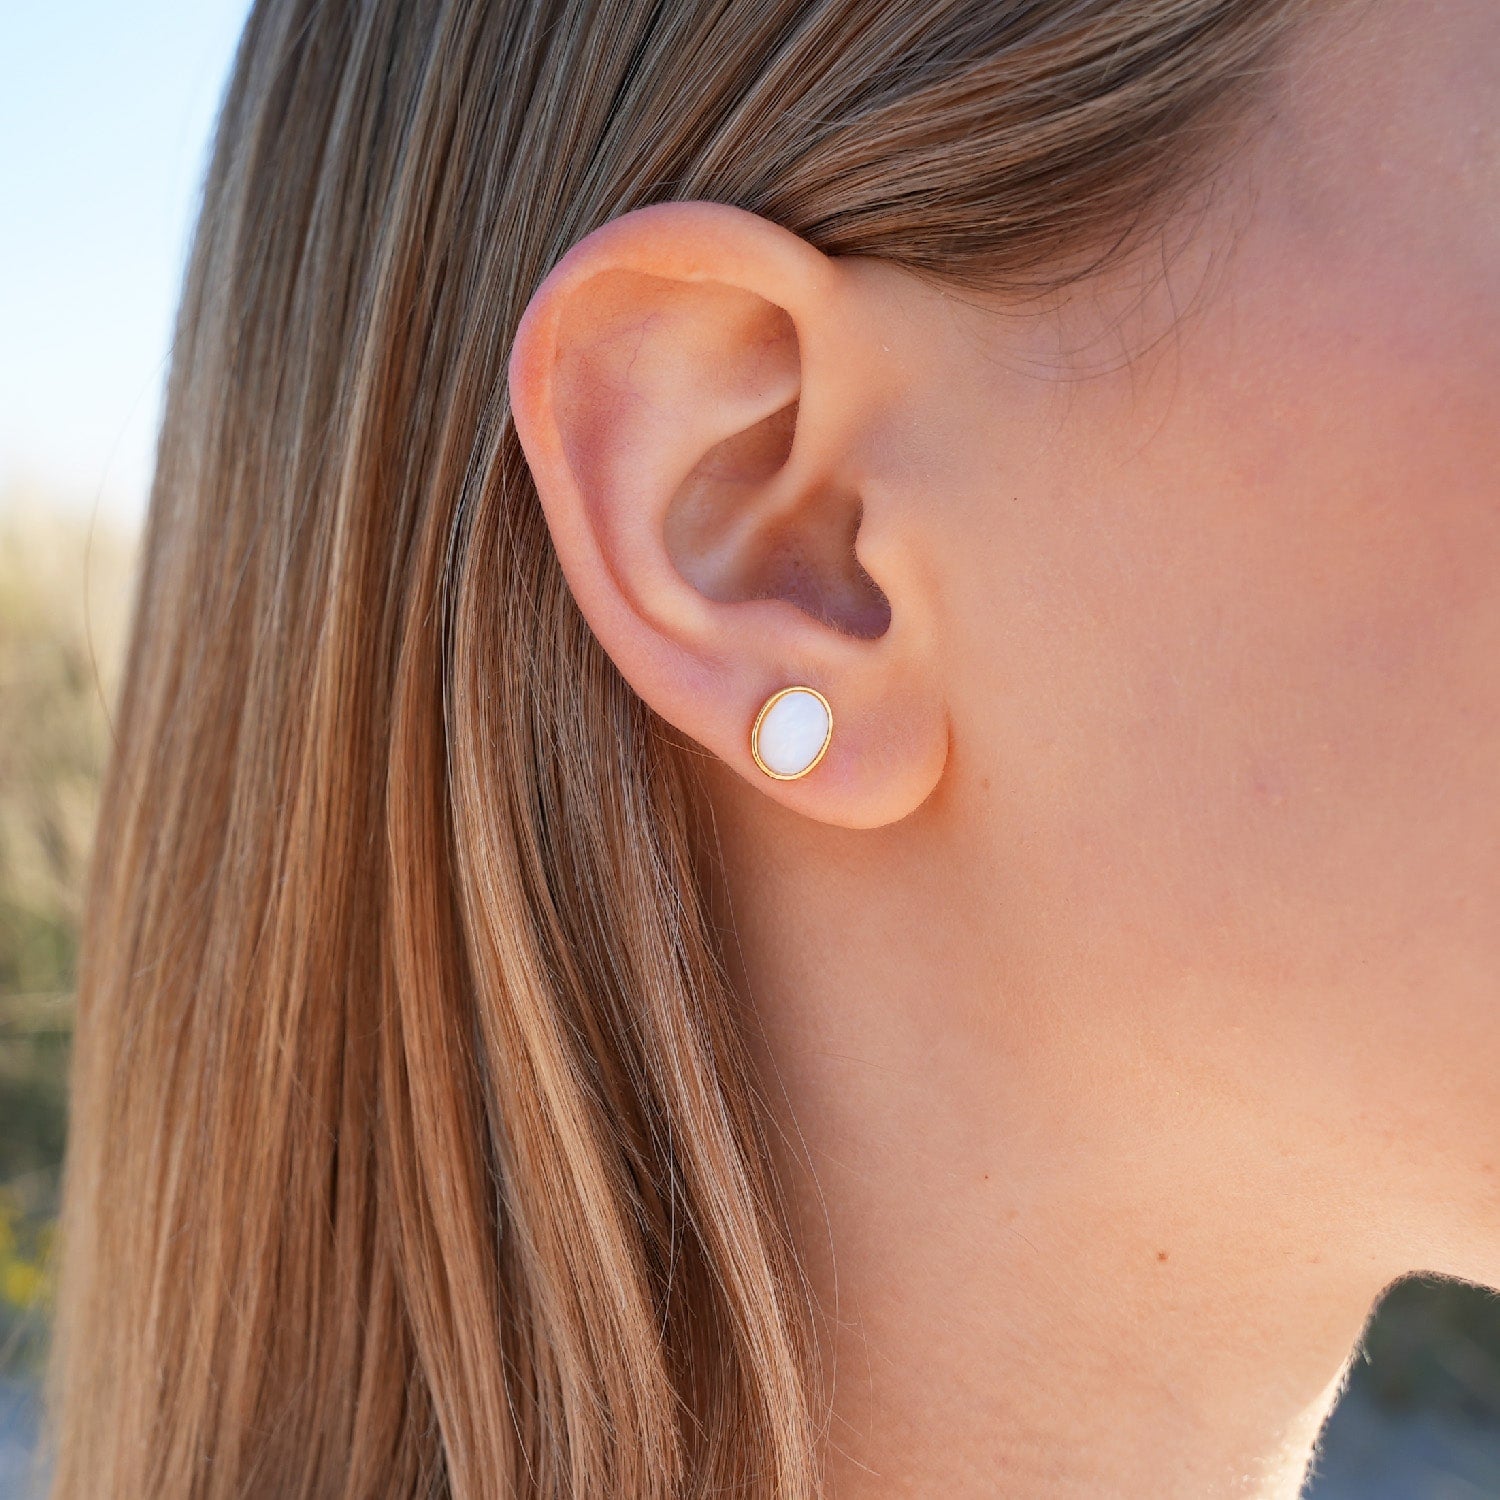 Ear Studs "Zoe" Mother-of-pearl - gold